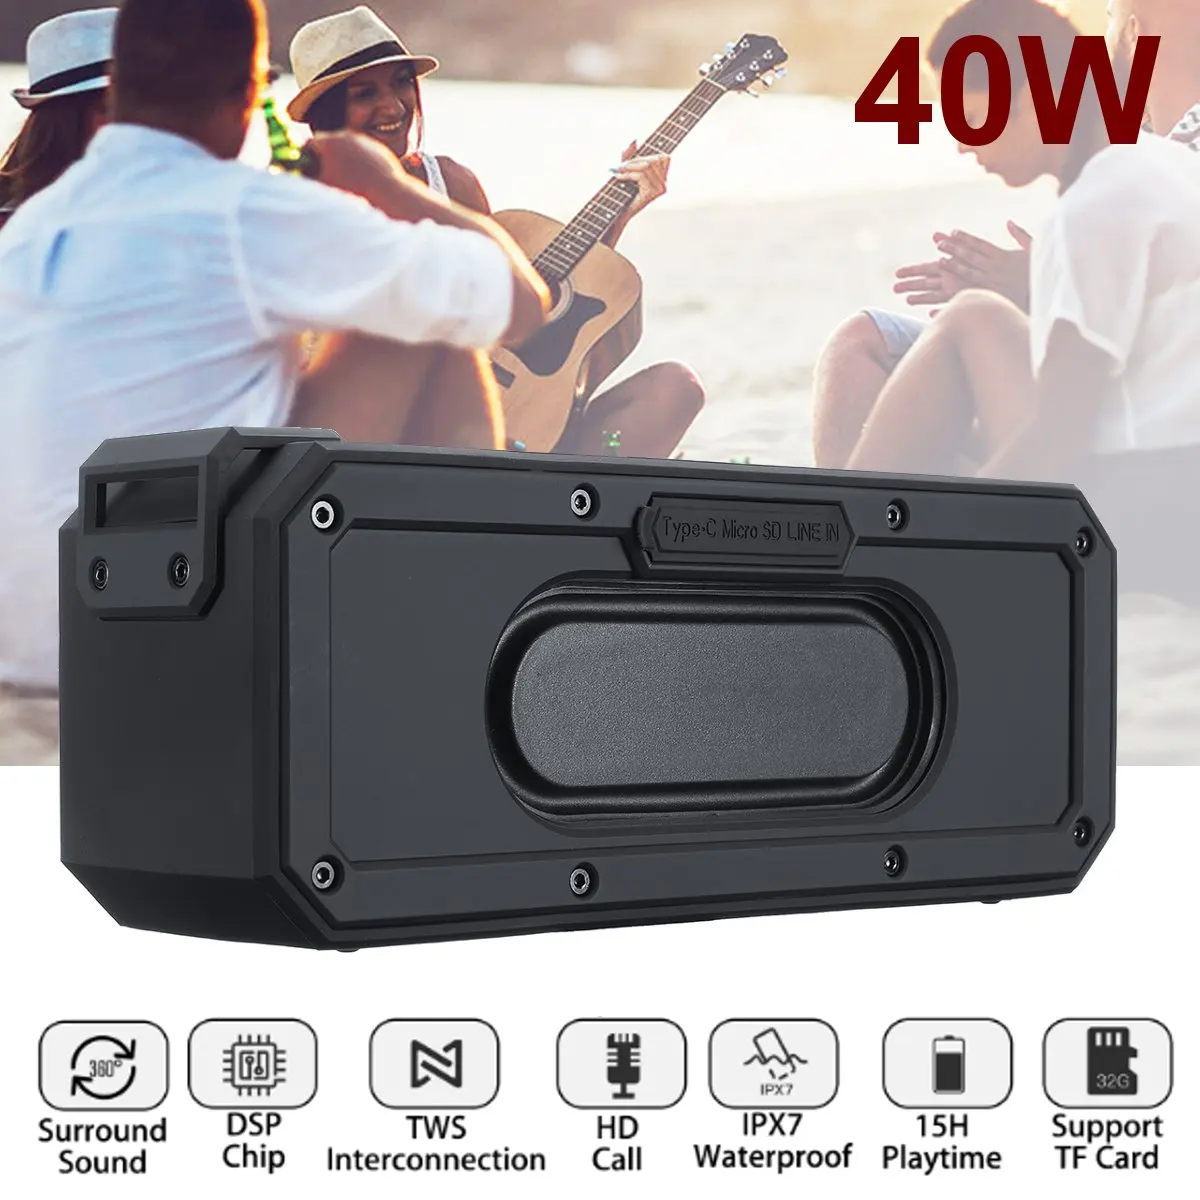 

Portable Subwoofer 40W Wireless Bluetooth Speaker TWS Features TF Card Stereo 6600mAh IPX7 Waterproof Microphone